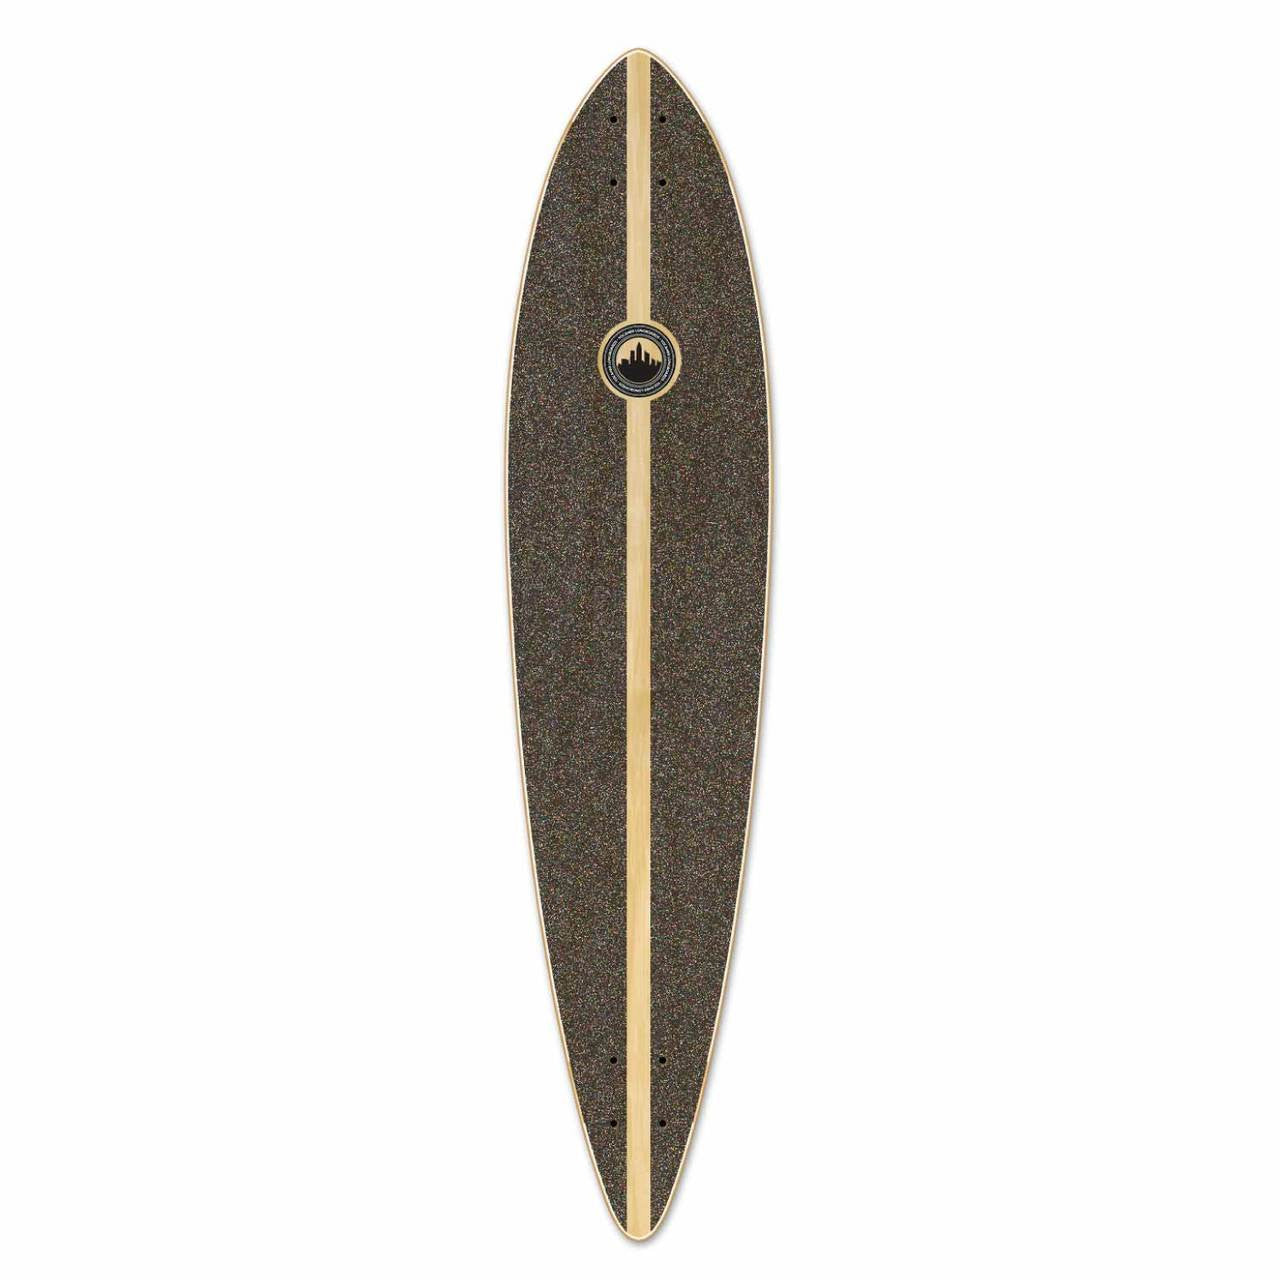 Yocaher Pintail Longboard Deck - Stained Blue